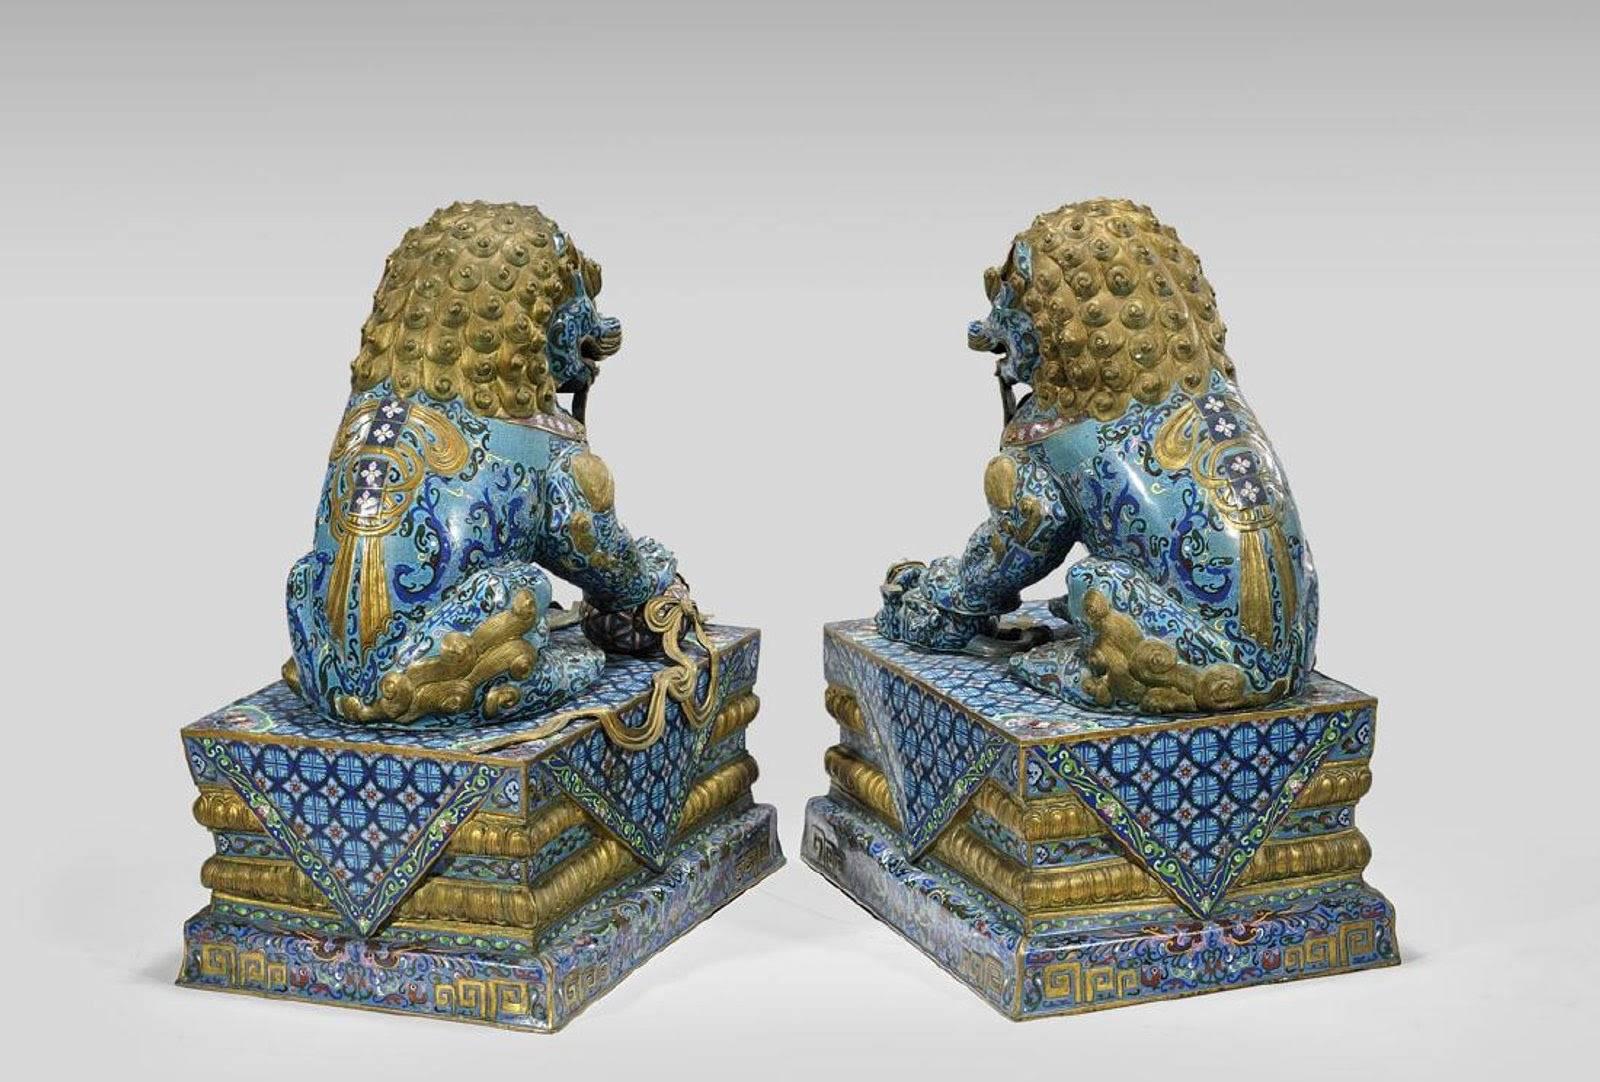 Pair of massive Chinese cloisonné enamel guardian lions; each parcel-gilt and finely detailed with scrolling lotus motifs on turquoise grounds, and pending a bell at the neck; the female with a cub under her paw, the male with a ball; each on an